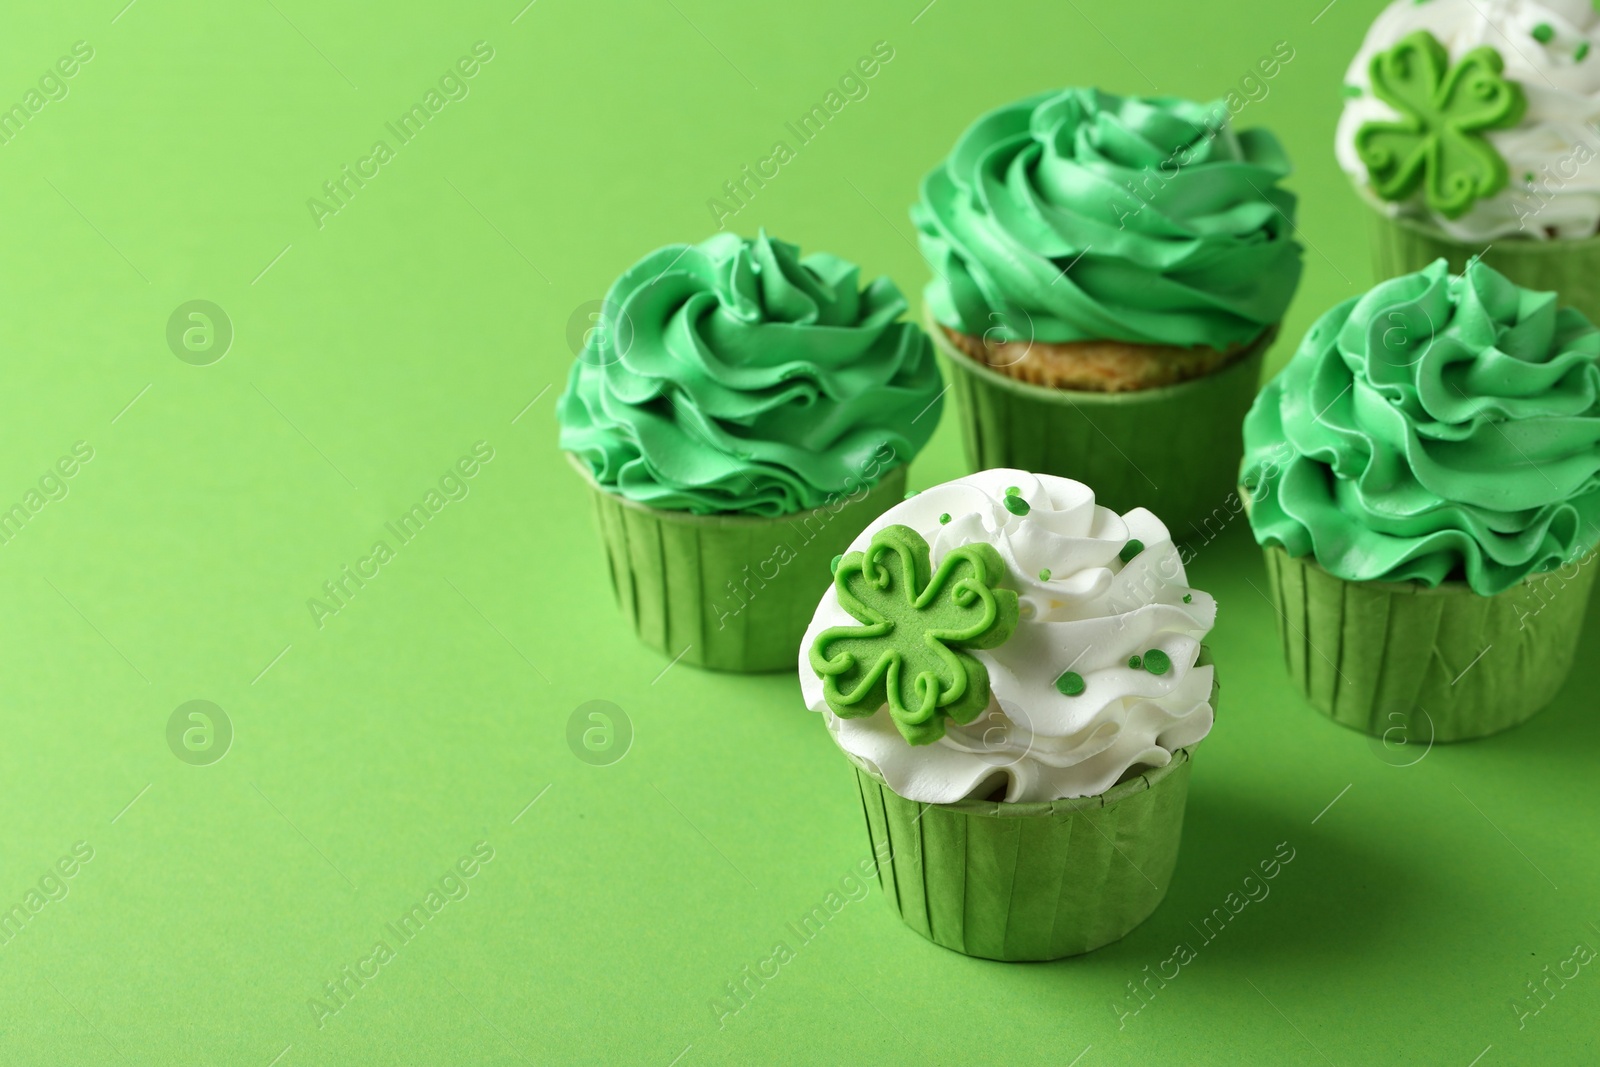 Photo of St. Patrick's day party. Tasty festively decorated cupcakes on green background, closeup. Space for text